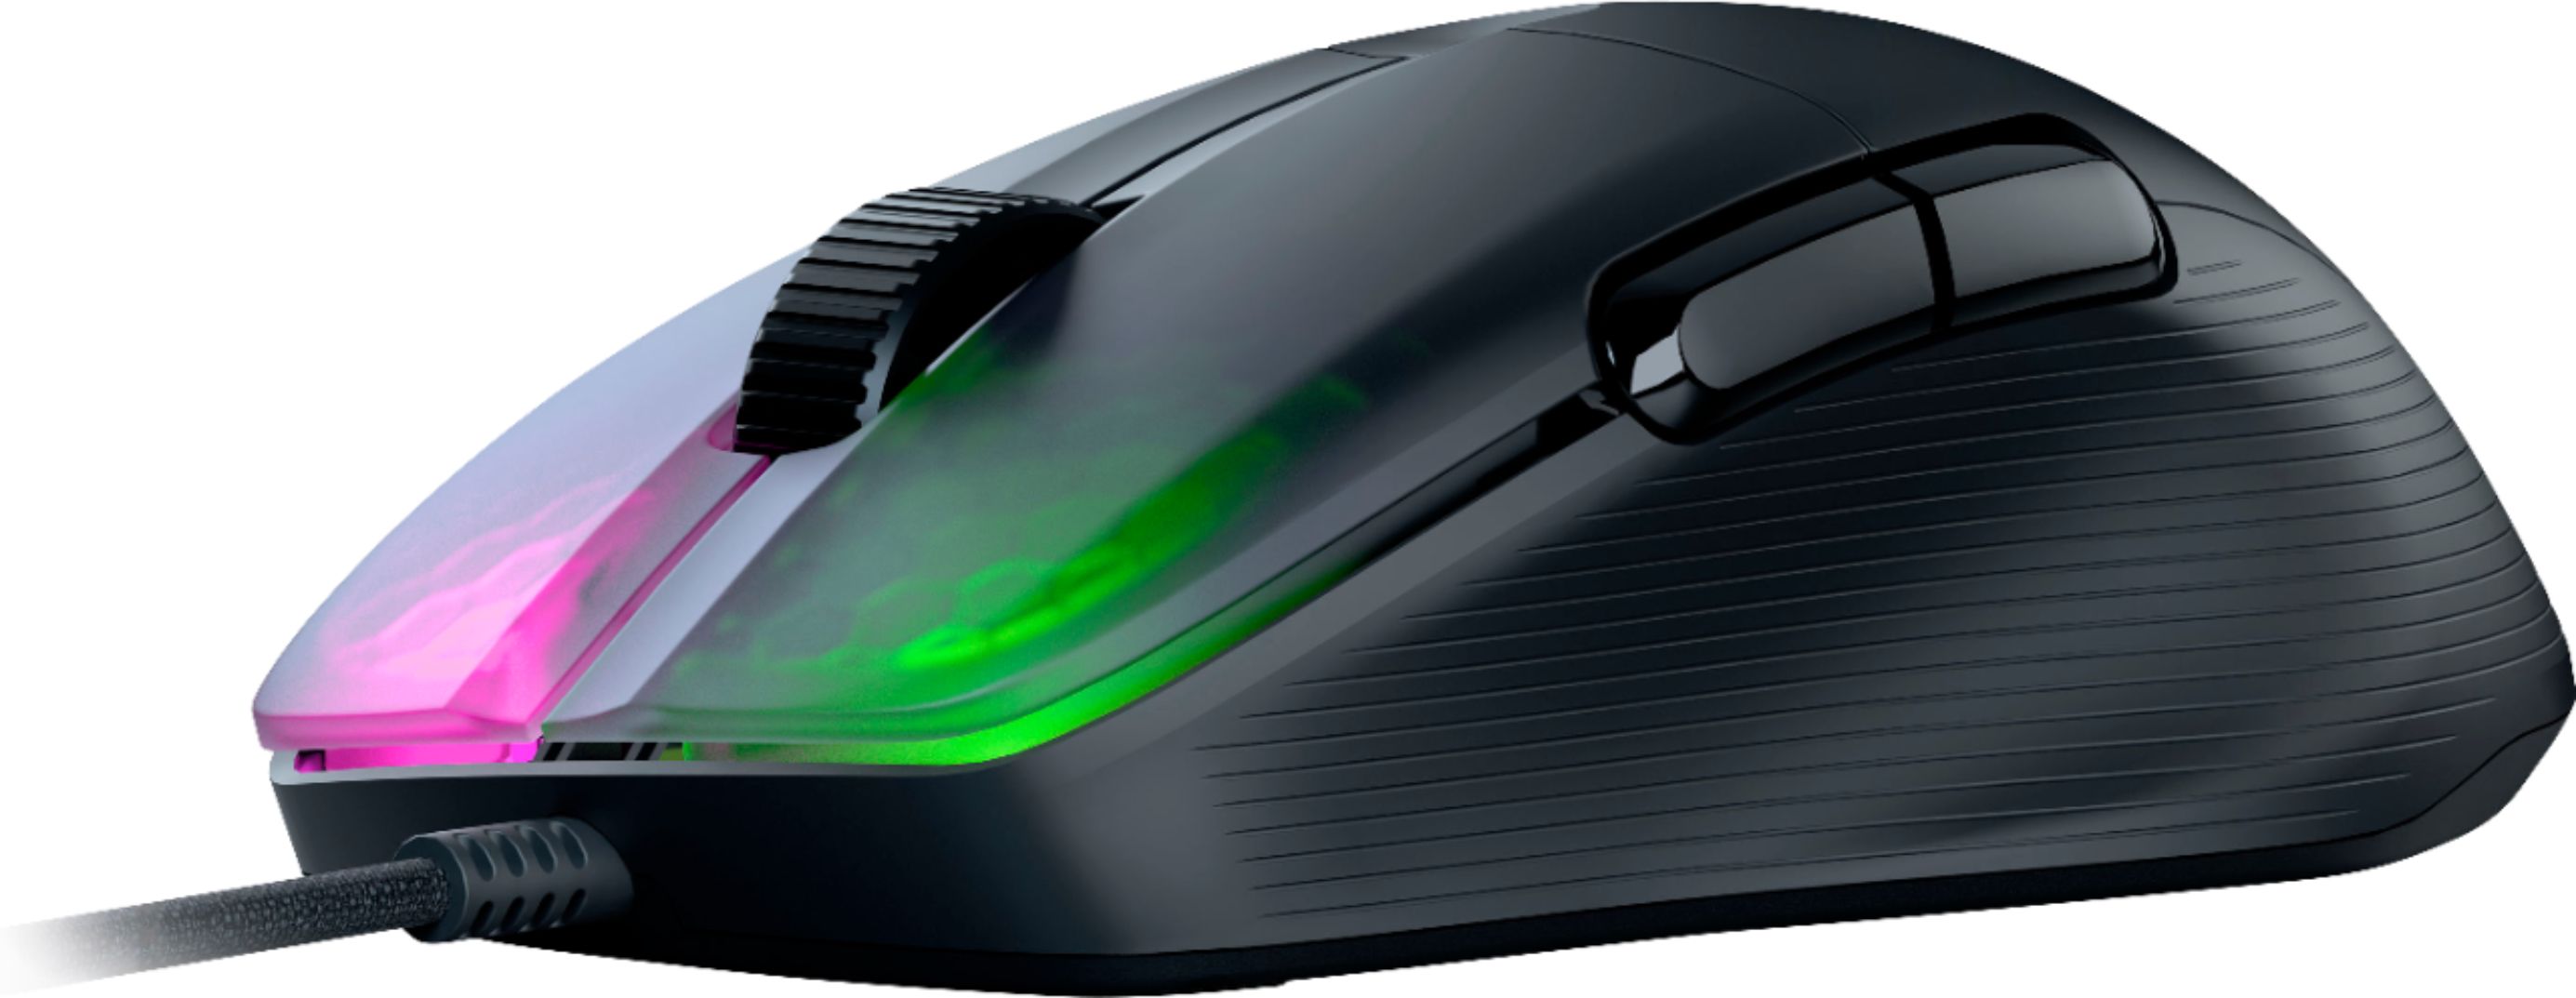 Roccat Kone Pro Wired Ultralight 19k Dpi Optical Gaming Mouse With Rgb Lighting Ash Black Roc 11 400 01 Best Buy